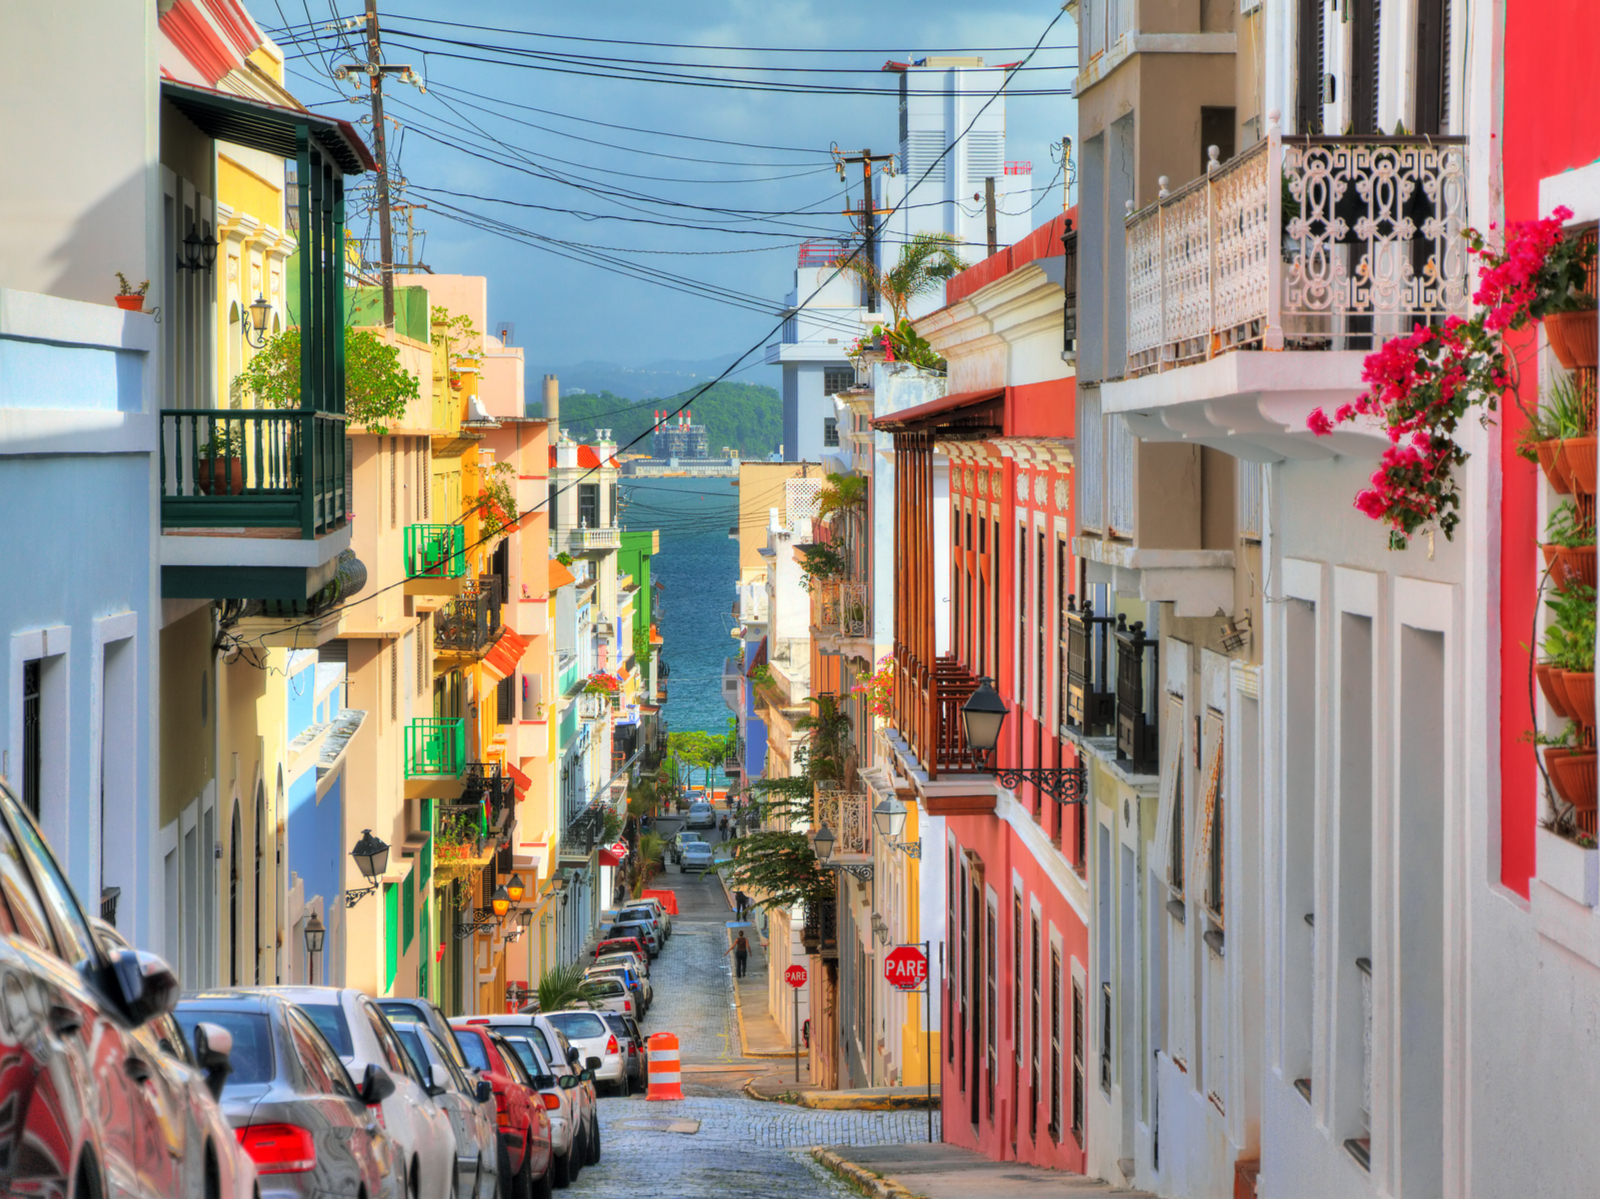 Vibrant alley of Old San Juan, as seen with neatly parked cars, one of the best things to do in Puerto Rico